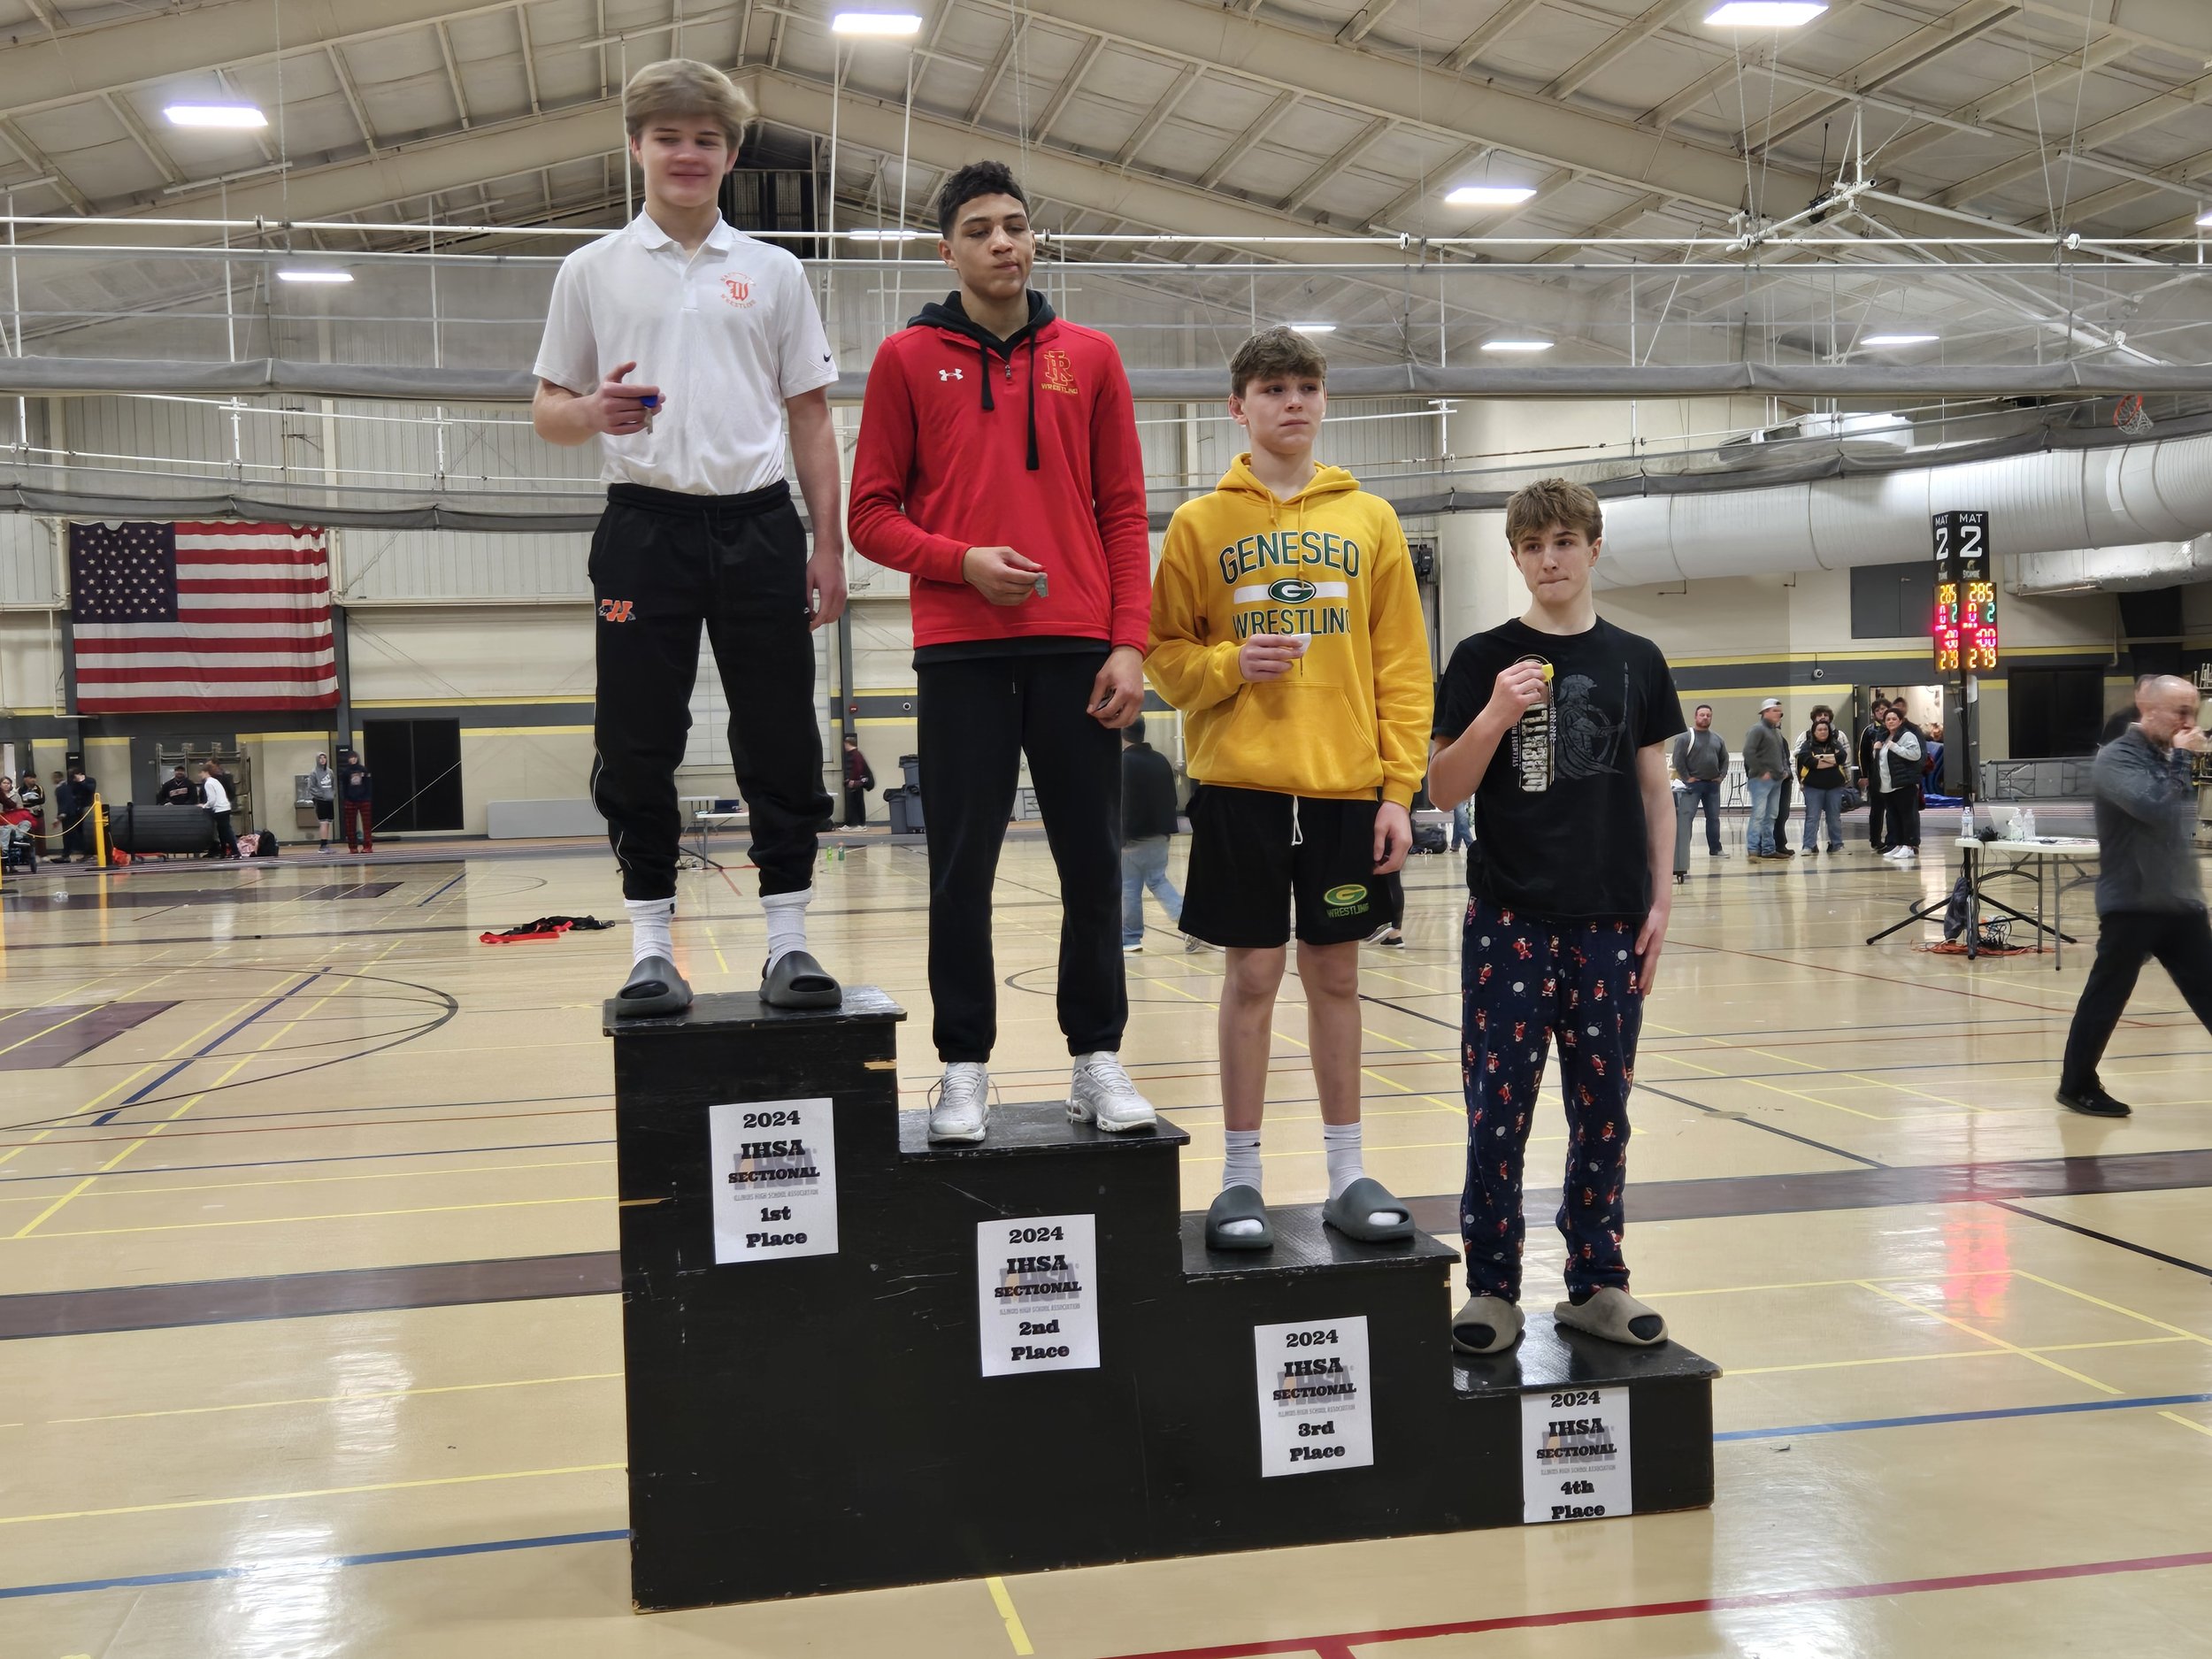 Izaac Gaines (3rd Place)